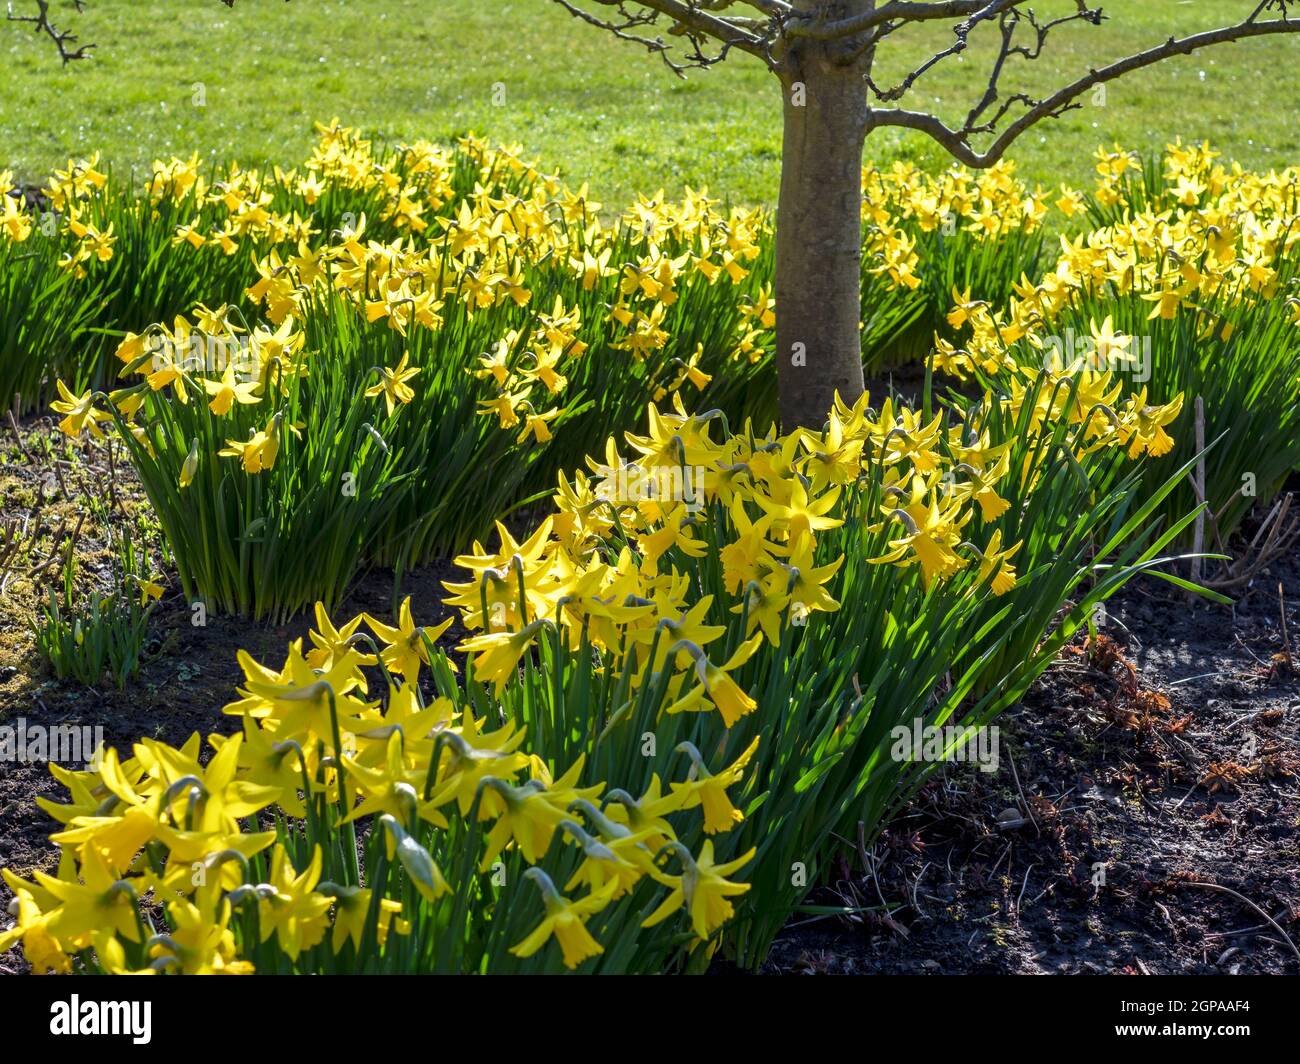 Yellow daffodils flowering around a small tree trunk in sunlight in spring Stock Photo